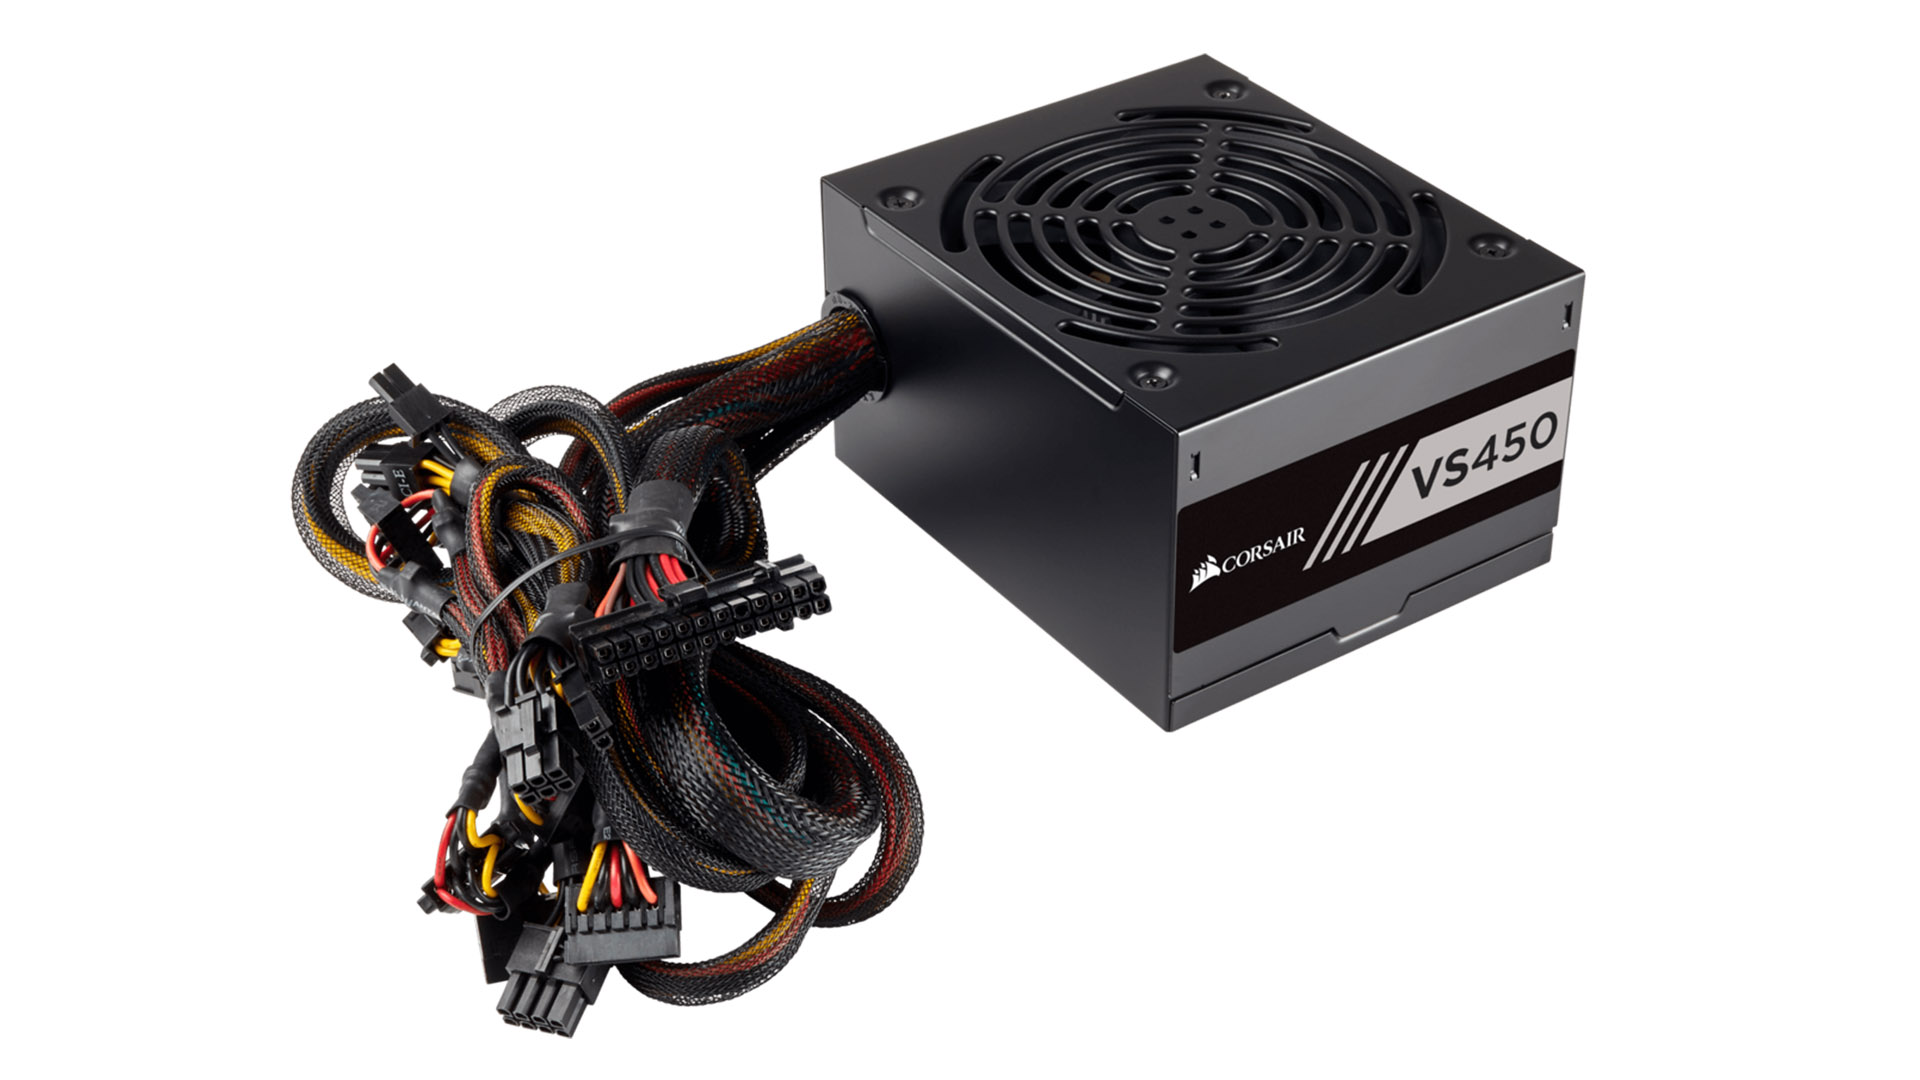 A Detailed Guide On How to Install a Rackmount Power Supply, by  Powersupplymall